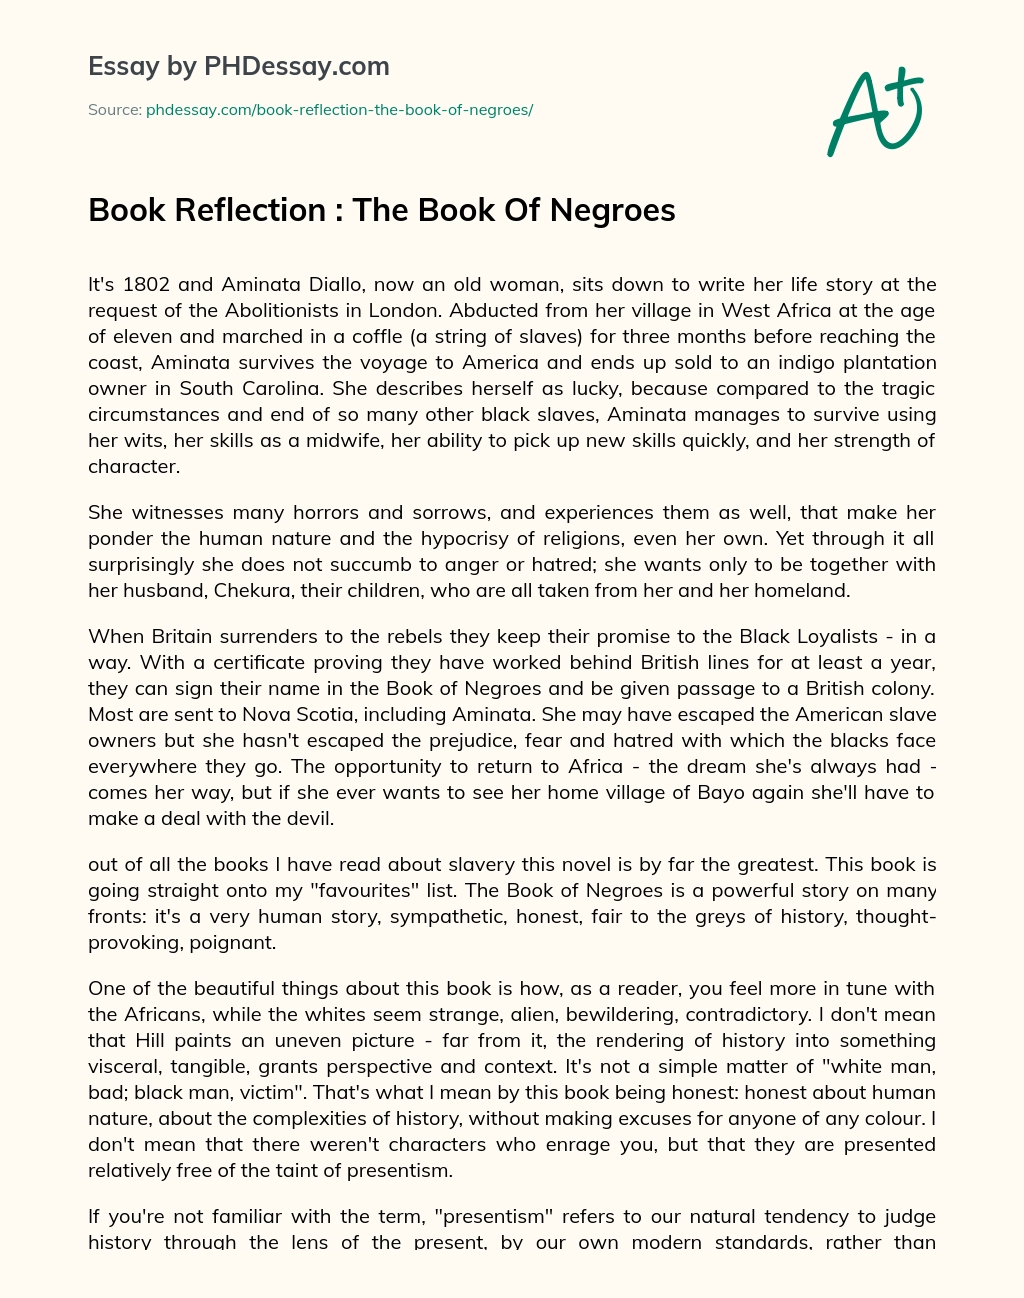 Book Reflection : The Book Of Negroes essay